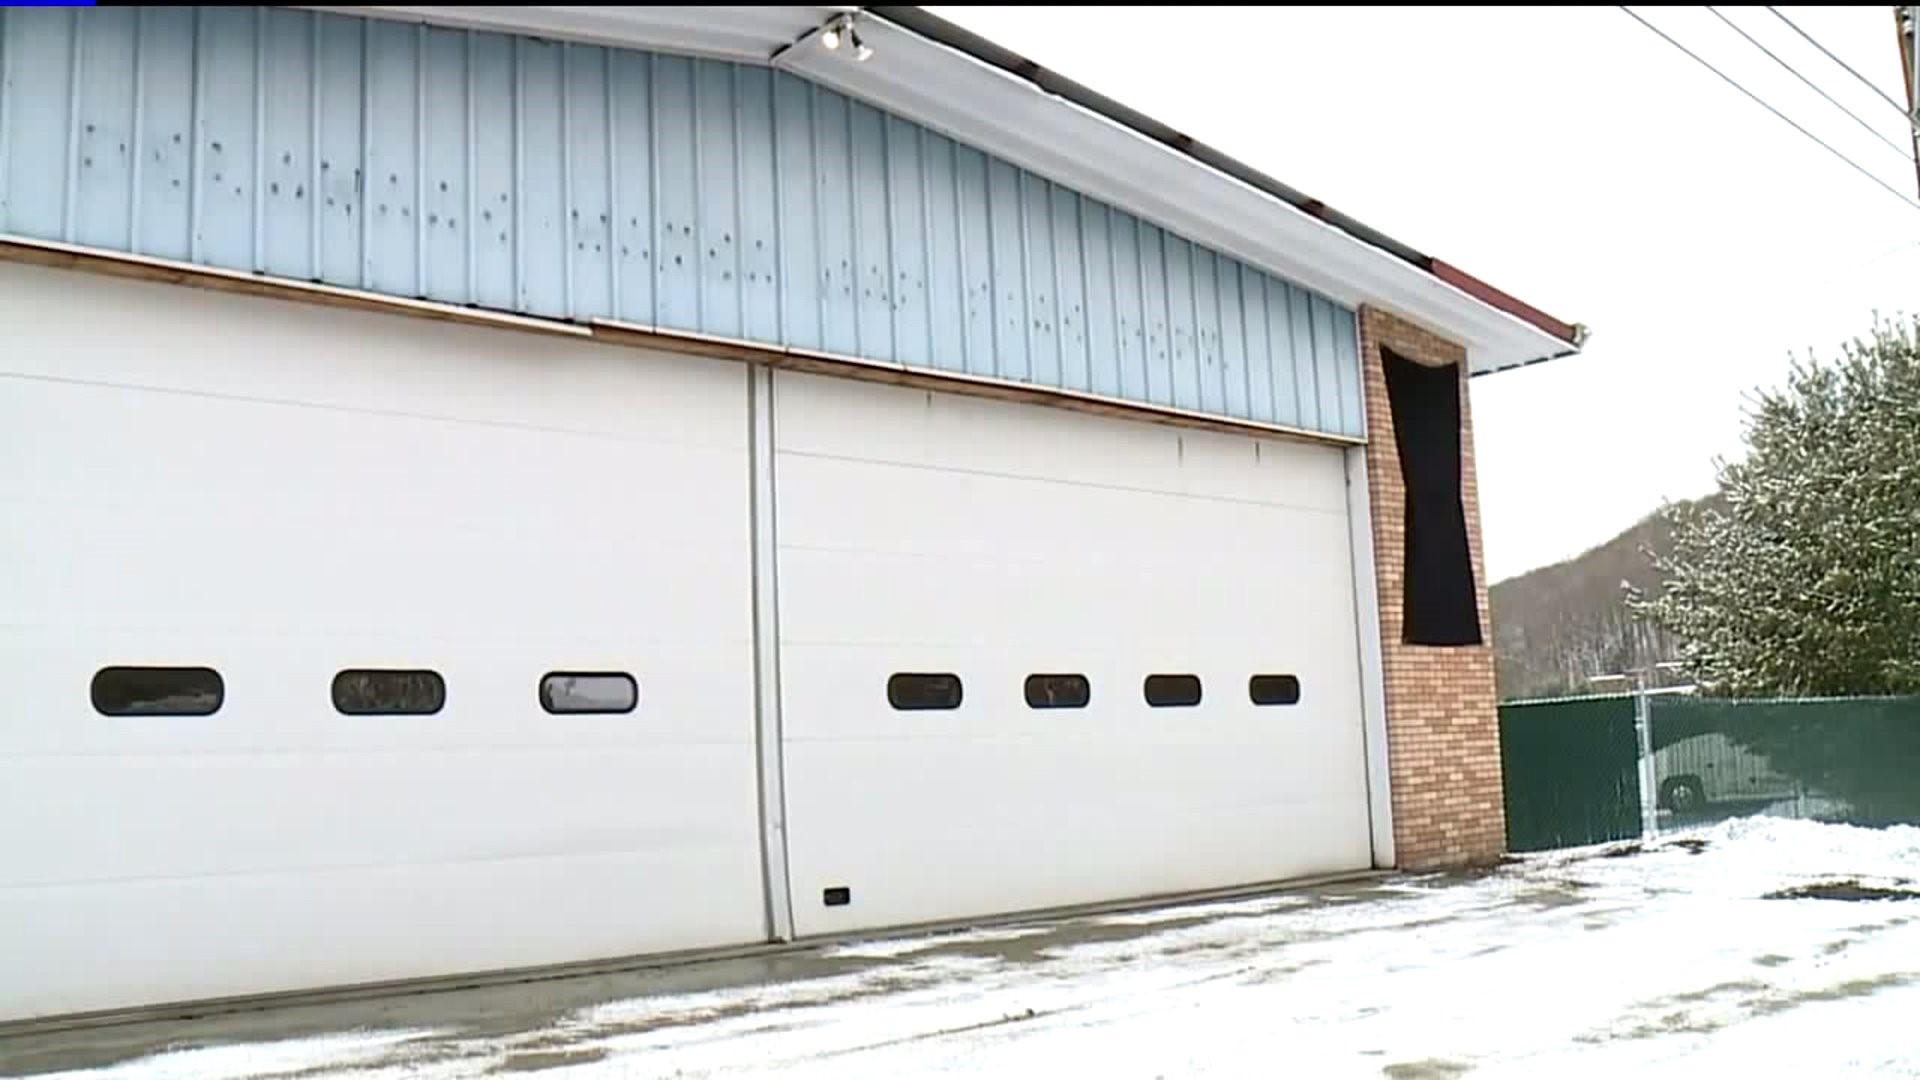 Fire Dept. Hoping to Raise Money for Renovations in the Poconos